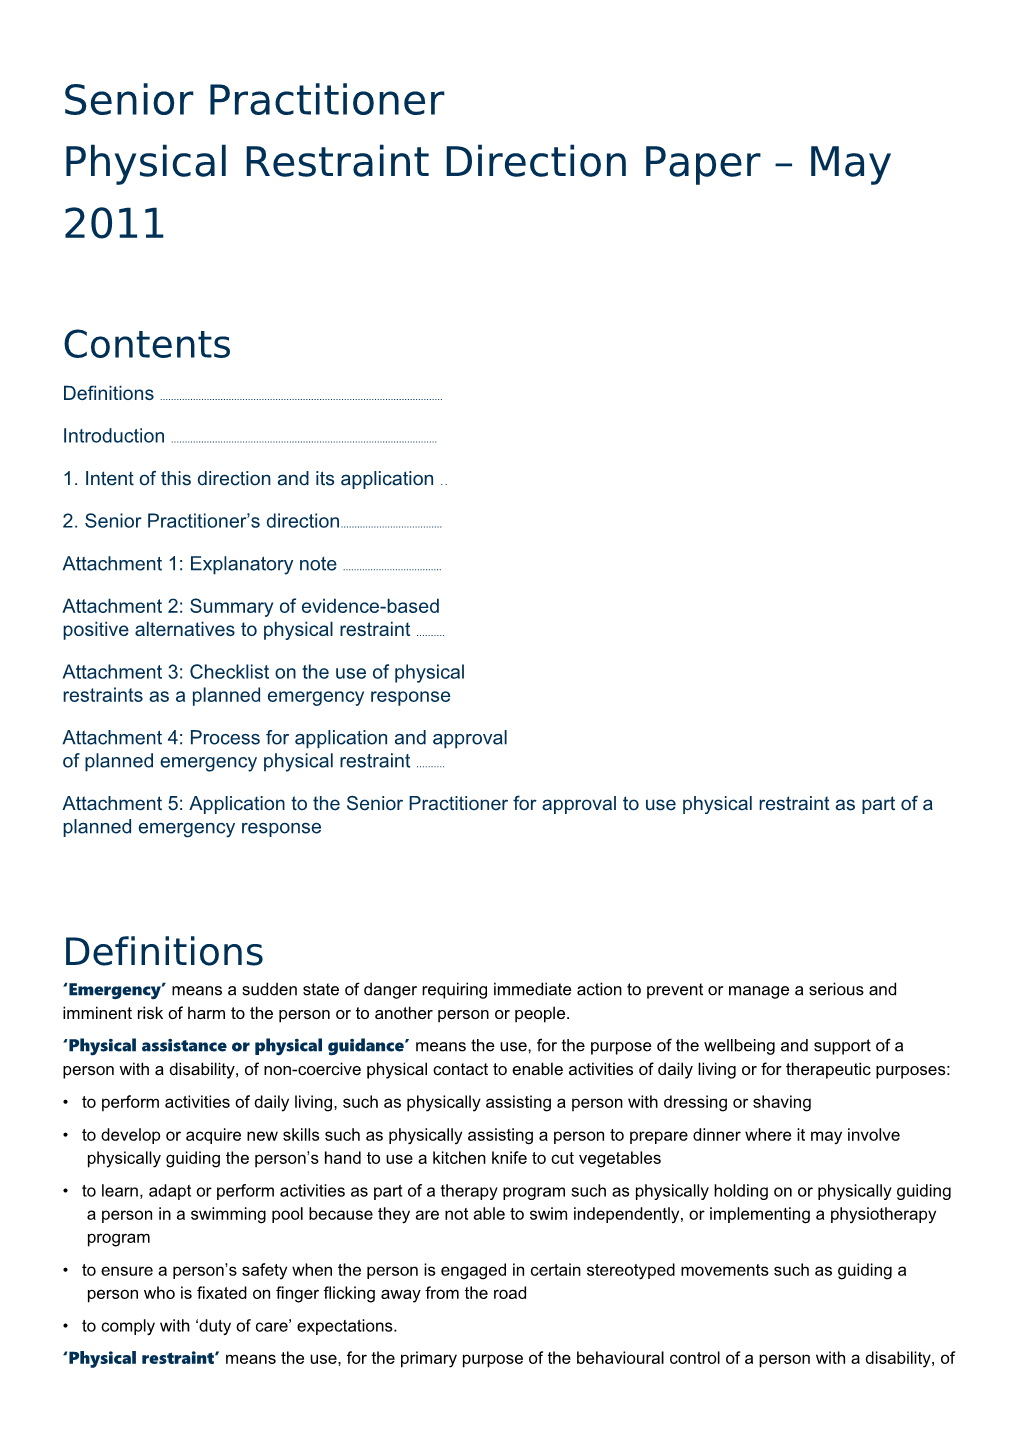 Senior Practitioner: Physical Restraint Direction Paper, May 2011